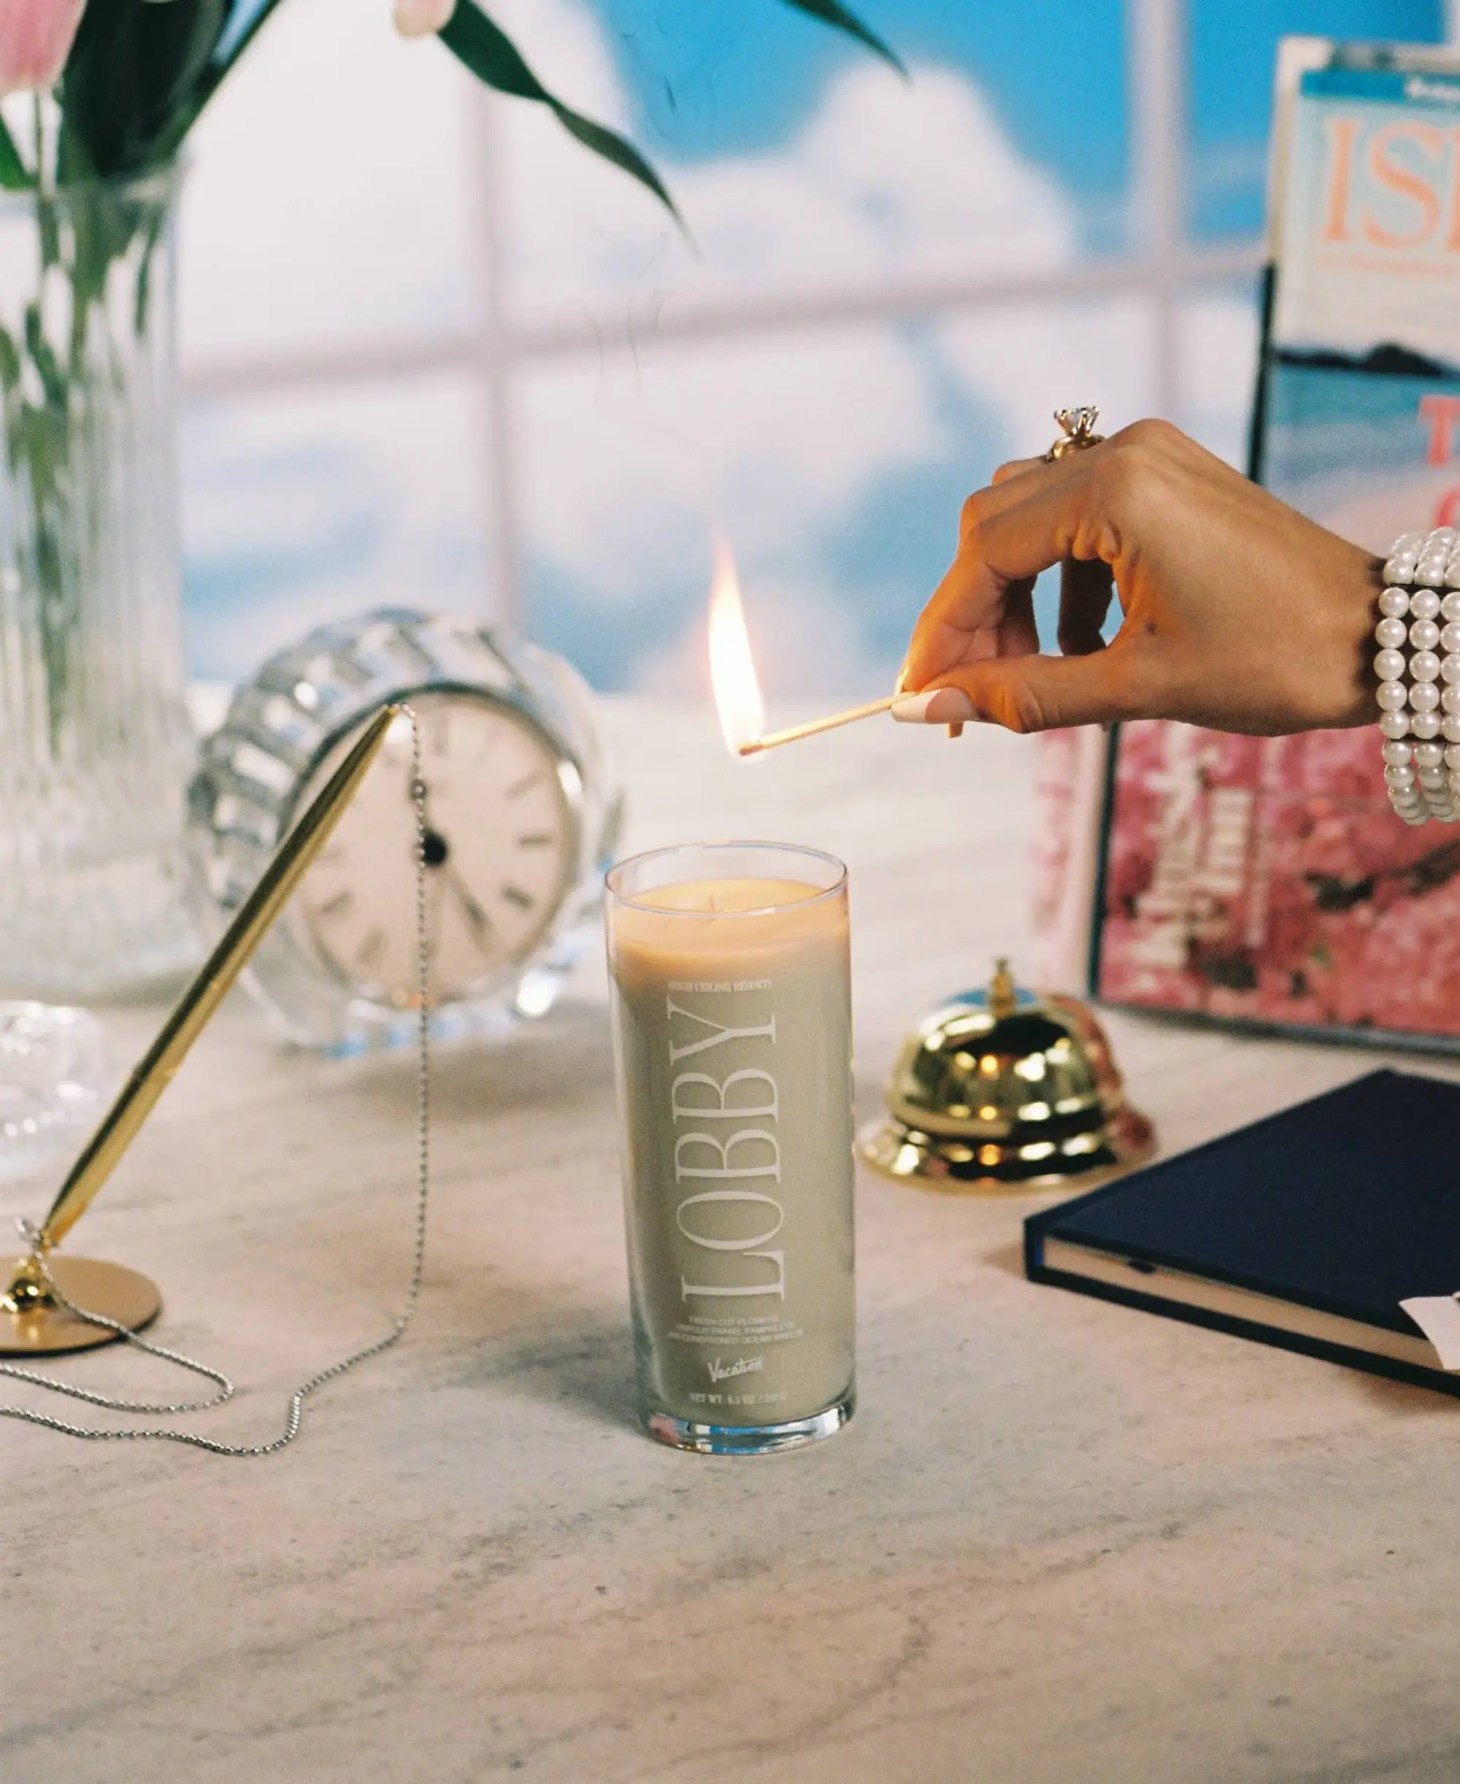 hand lighting the vacation lobby long-lasting candle